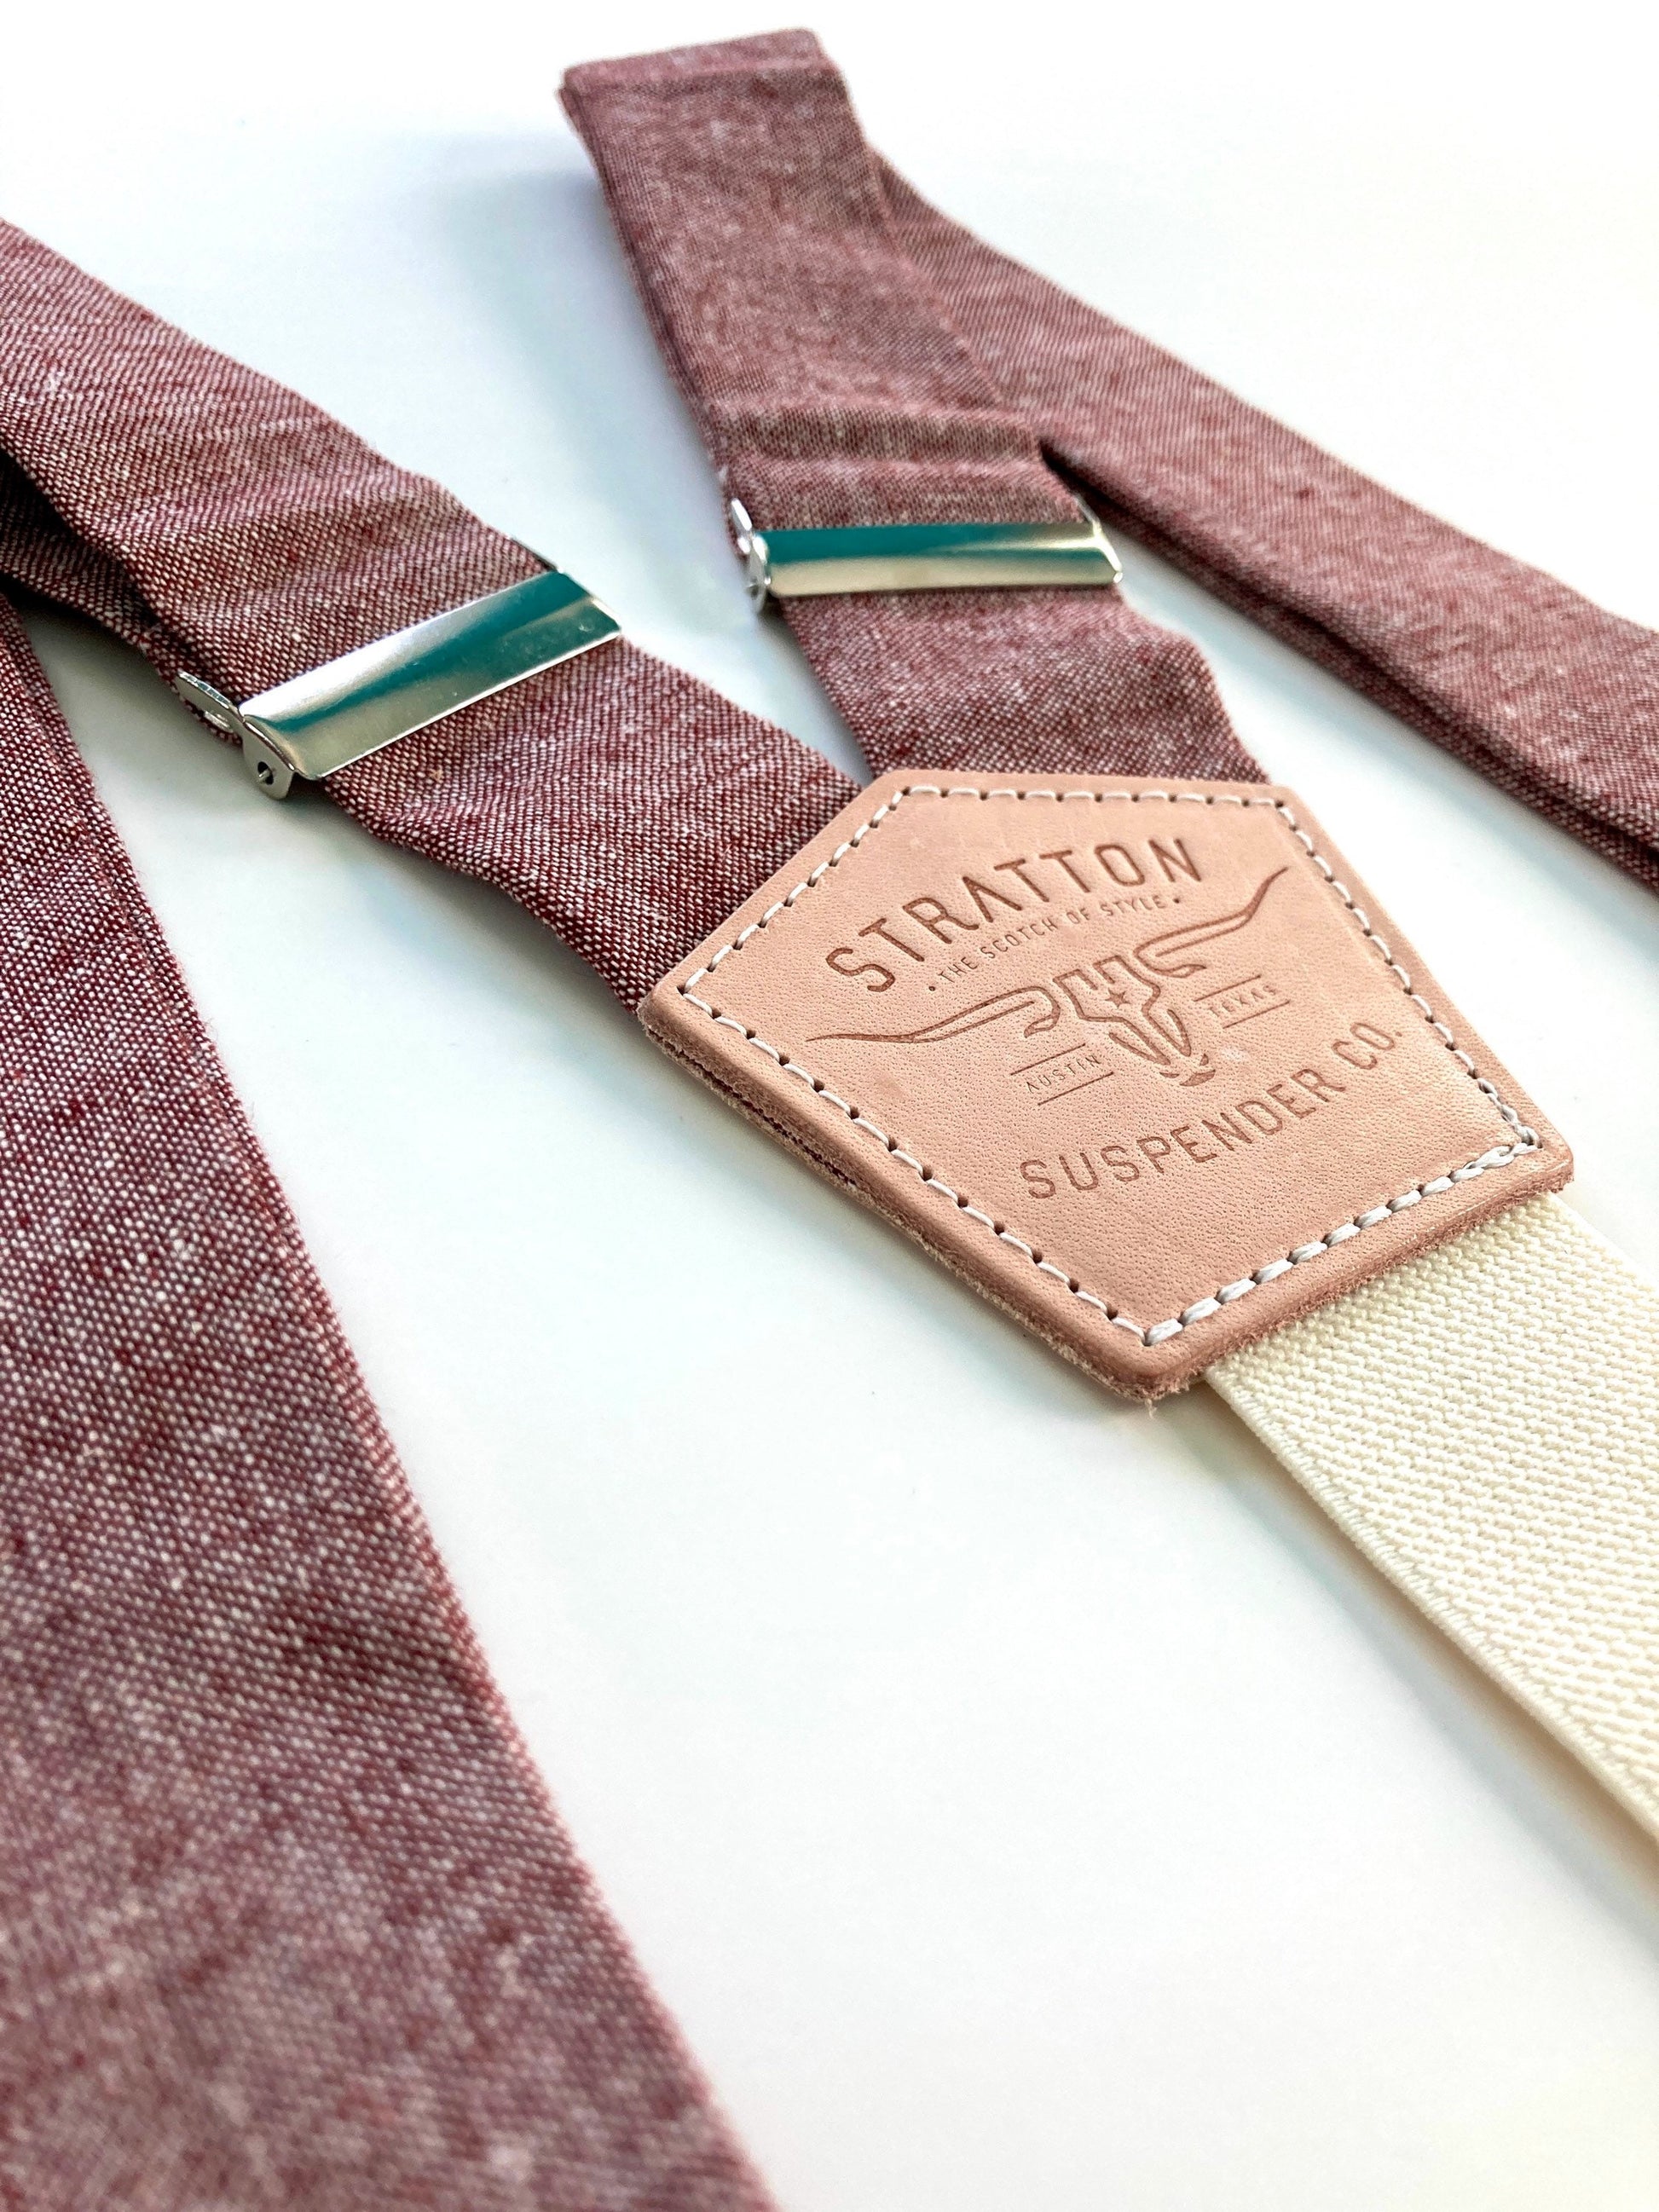 Stratton Suspender Co. features the Rust (Maroon) linen suspenders on veg tan shoulder leather with cream colored elastic back strap for the Fall 2022 suspenders collection 